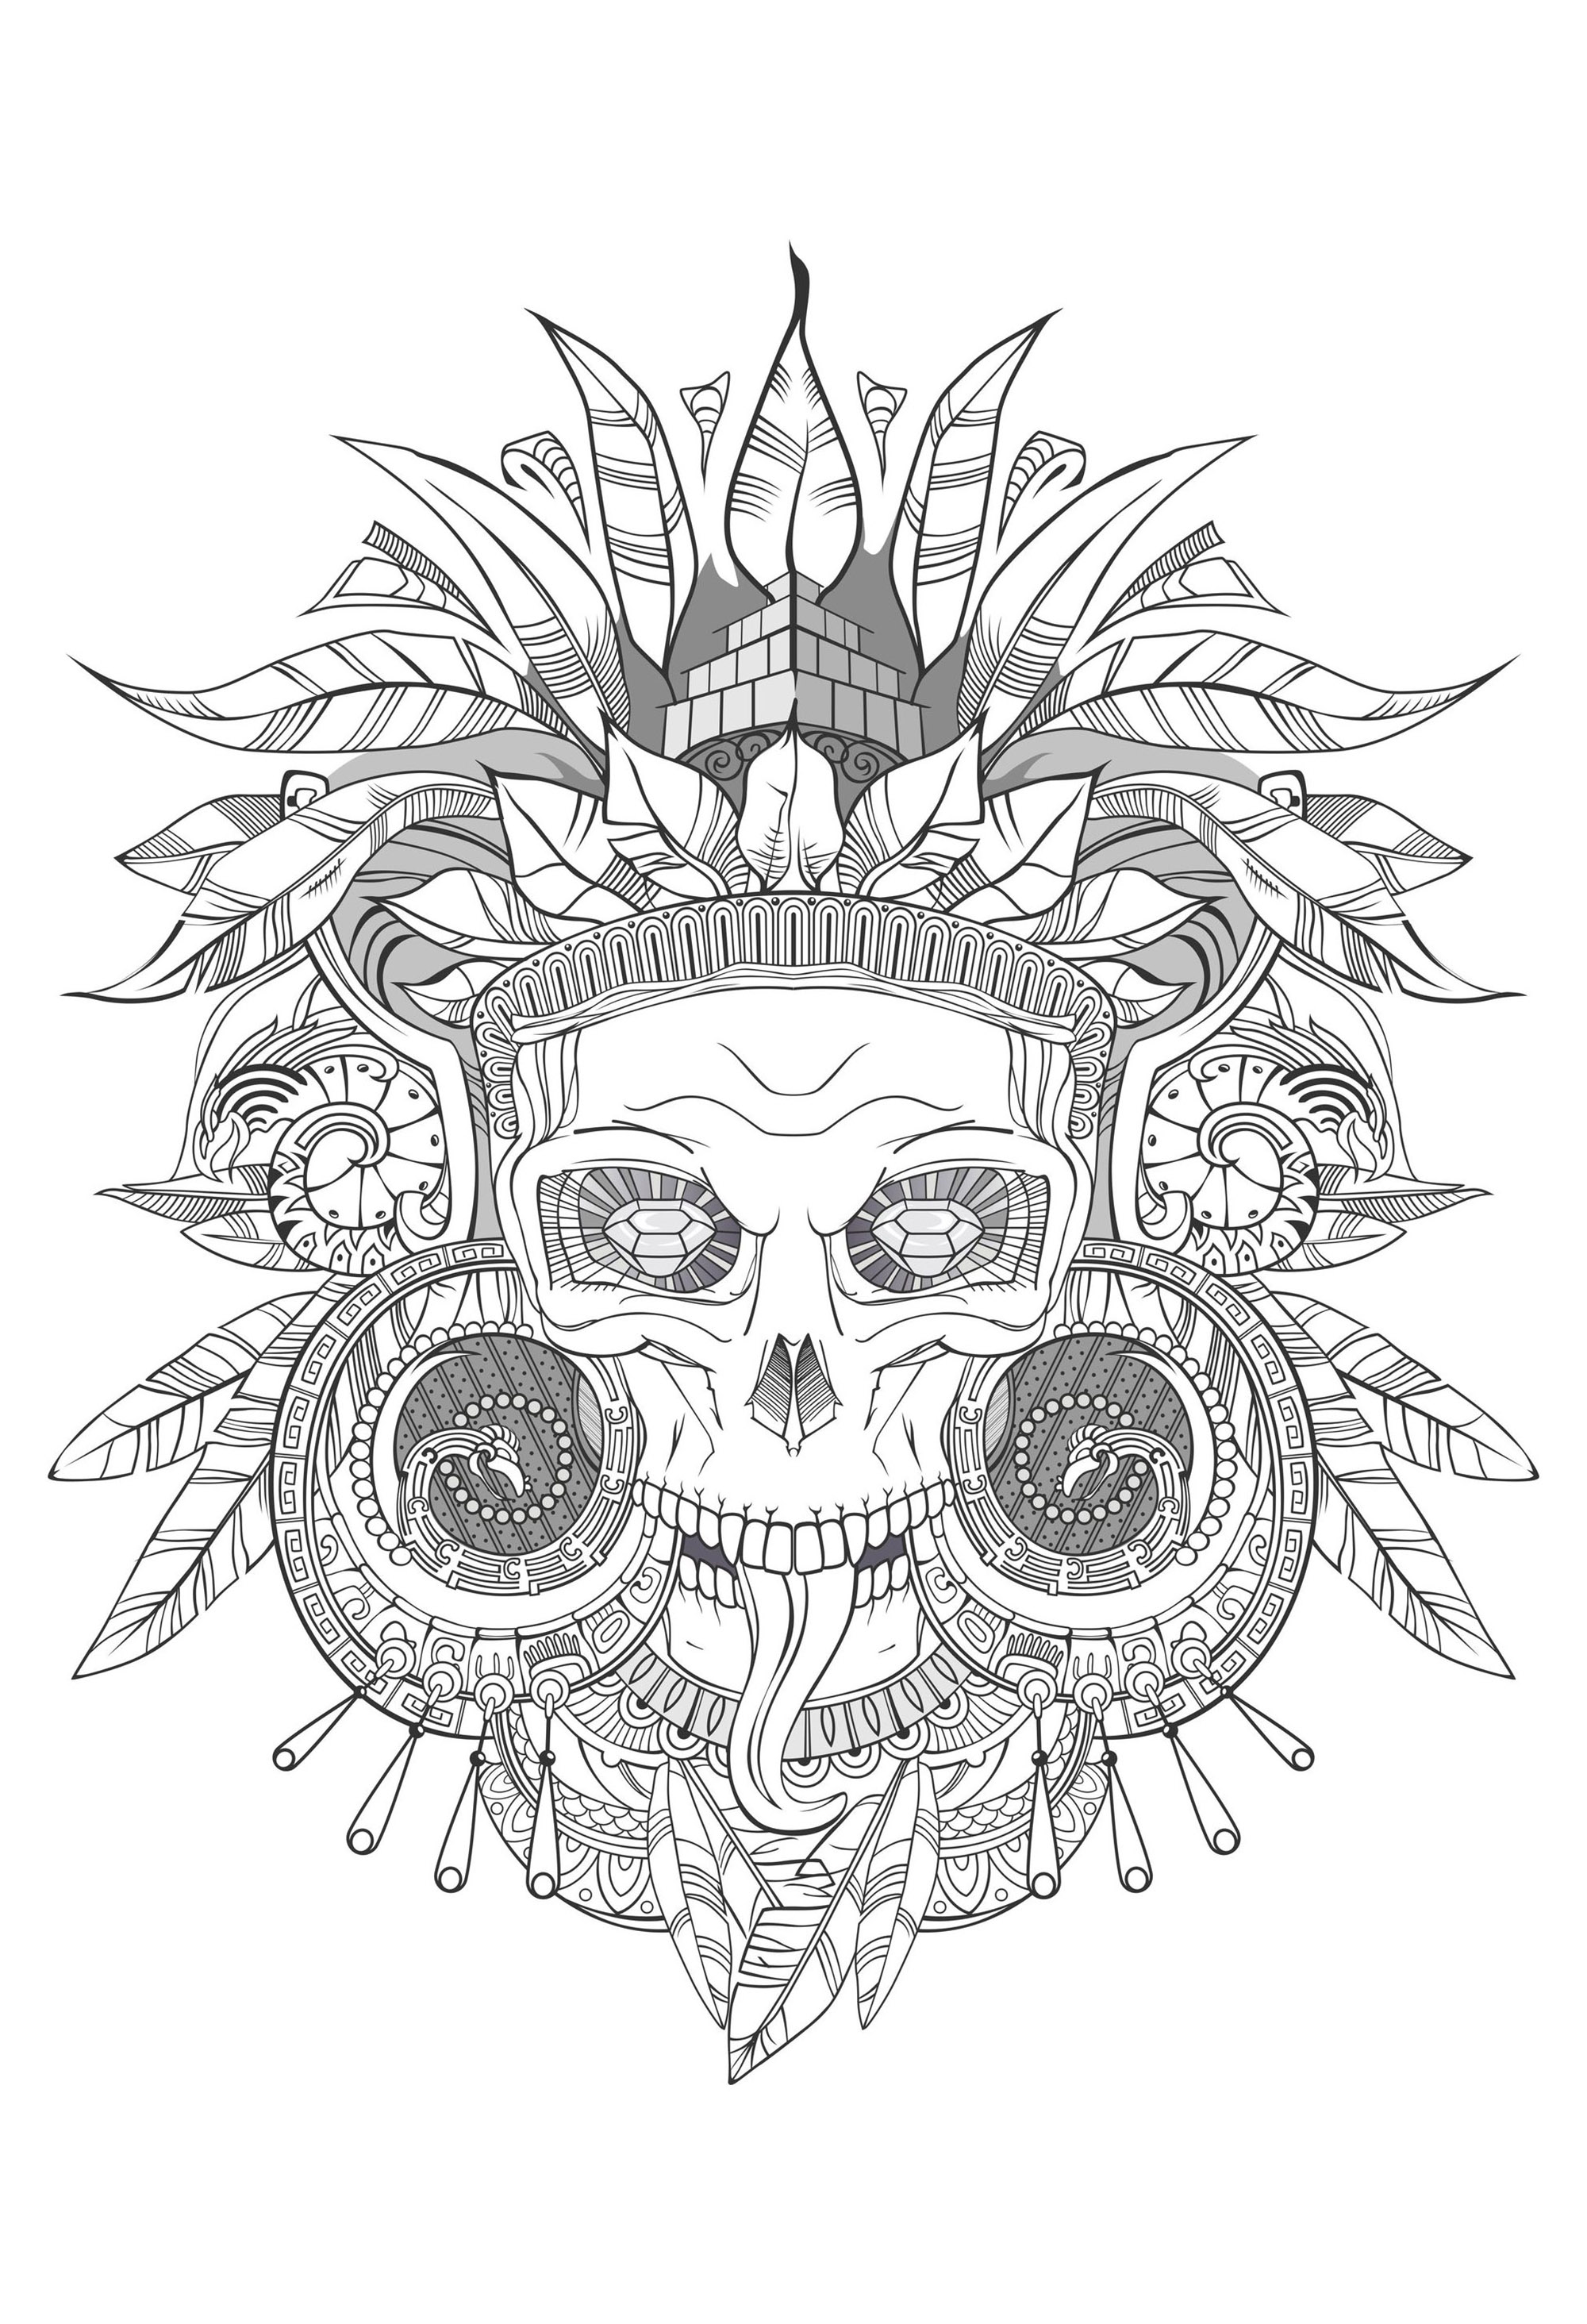 Download Aztec skull shades of grey - Mayans & Incas Adult Coloring Pages